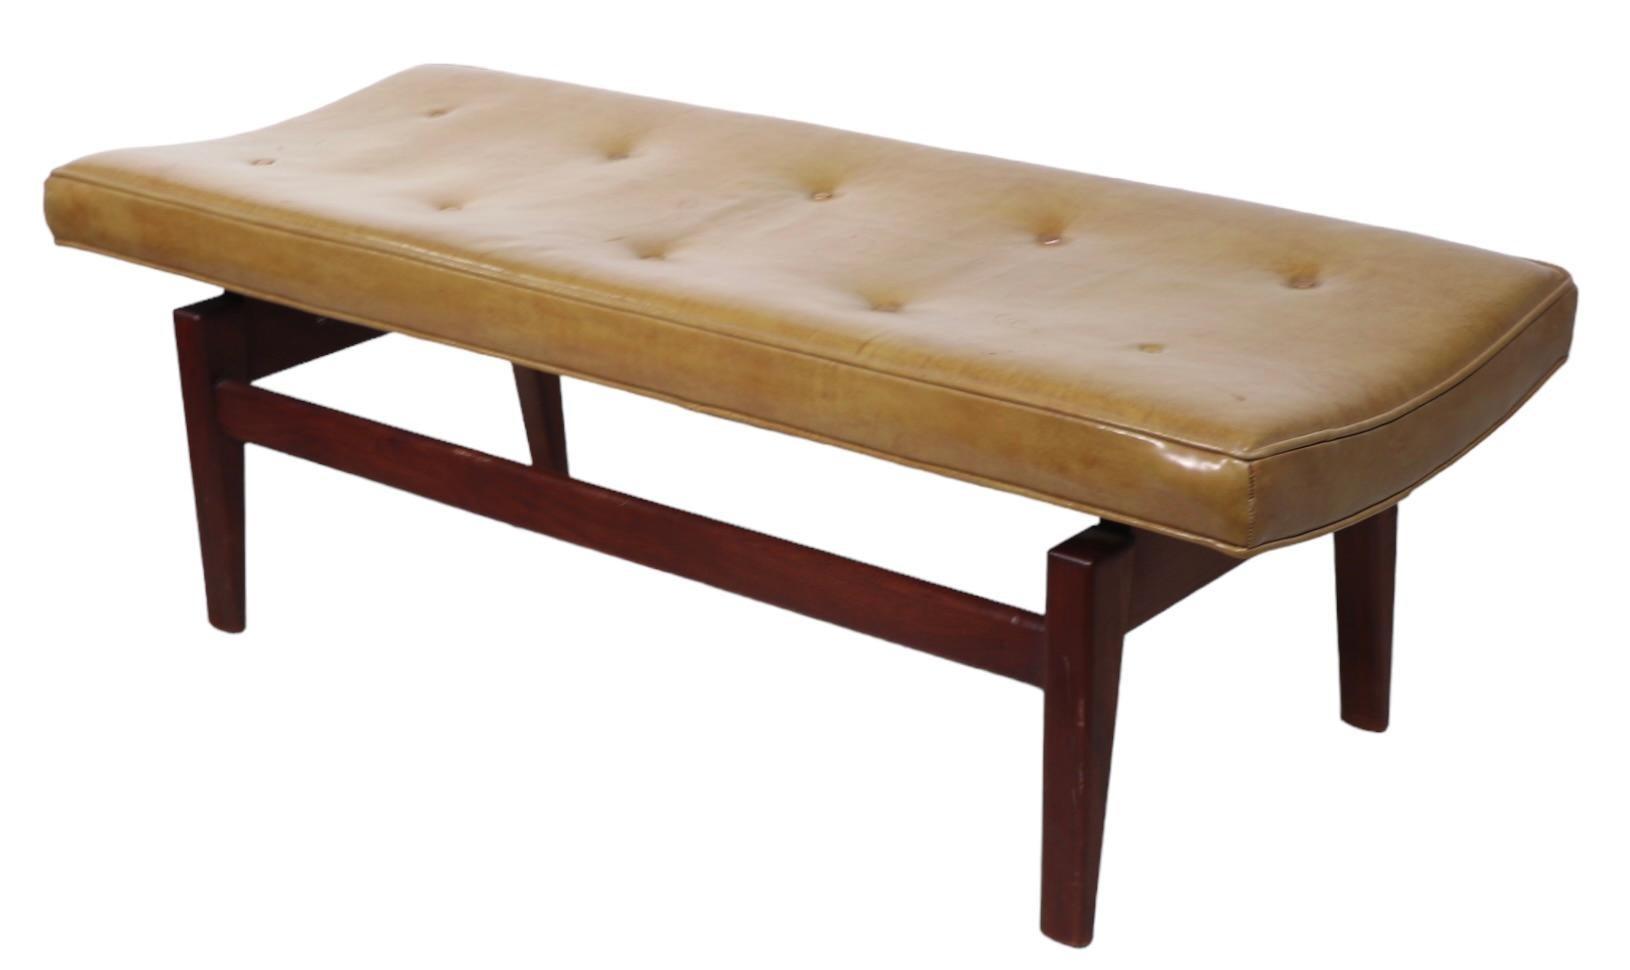   Architectural Mid Century Jens Risom Bench with Walnut Legs and Leather Top  For Sale 6